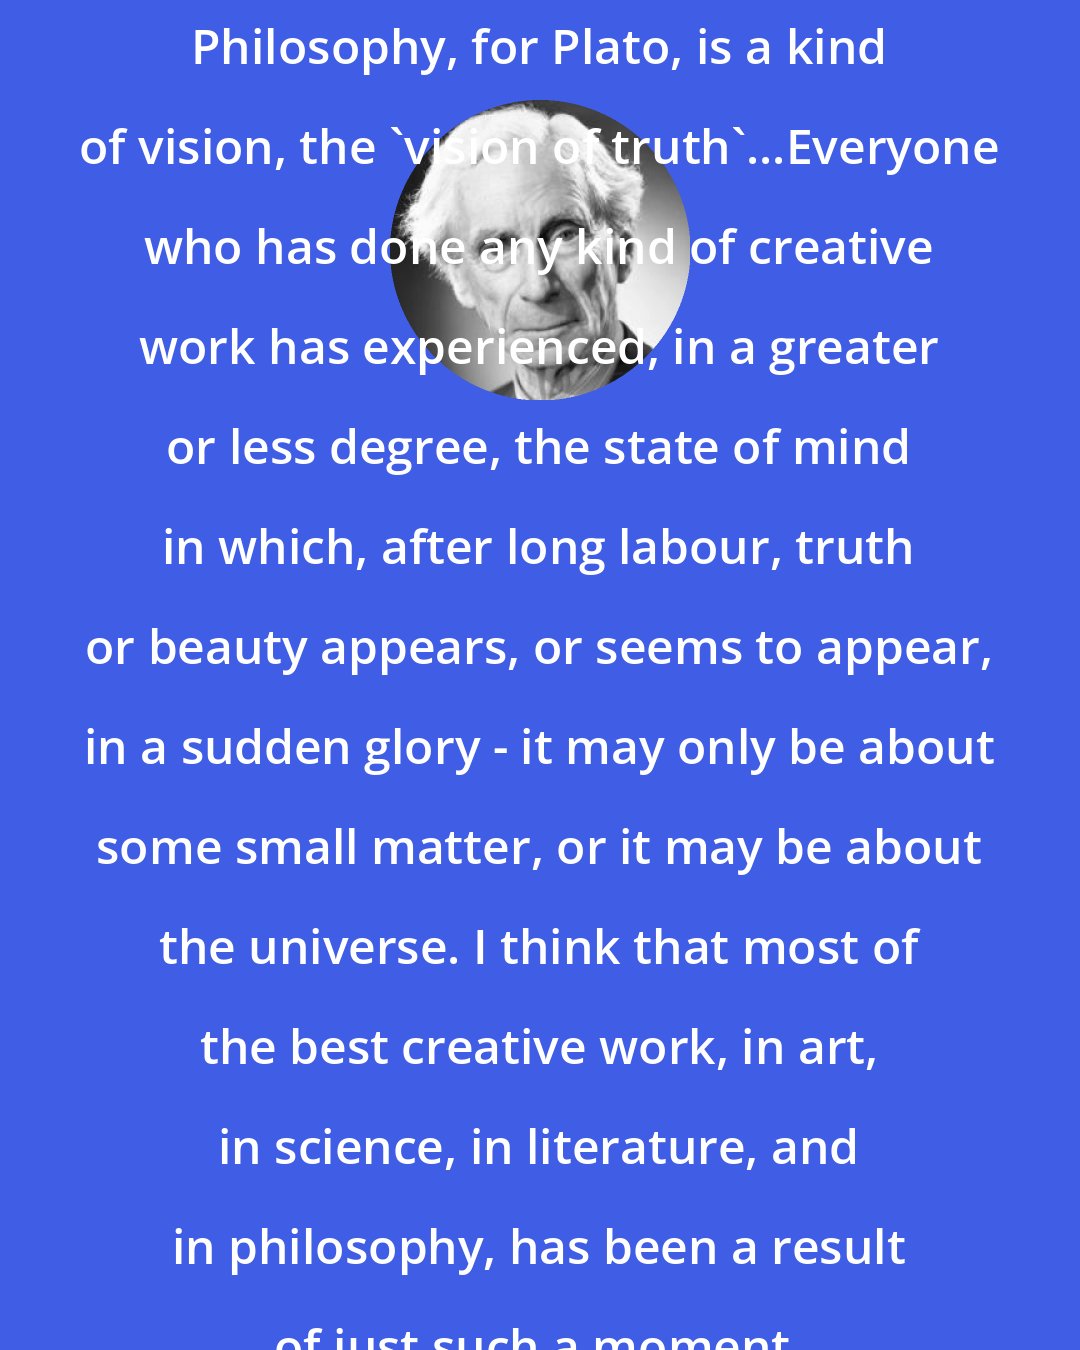 Bertrand Russell: Philosophy, for Plato, is a kind of vision, the 'vision of truth'...Everyone who has done any kind of creative work has experienced, in a greater or less degree, the state of mind in which, after long labour, truth or beauty appears, or seems to appear, in a sudden glory - it may only be about some small matter, or it may be about the universe. I think that most of the best creative work, in art, in science, in literature, and in philosophy, has been a result of just such a moment.